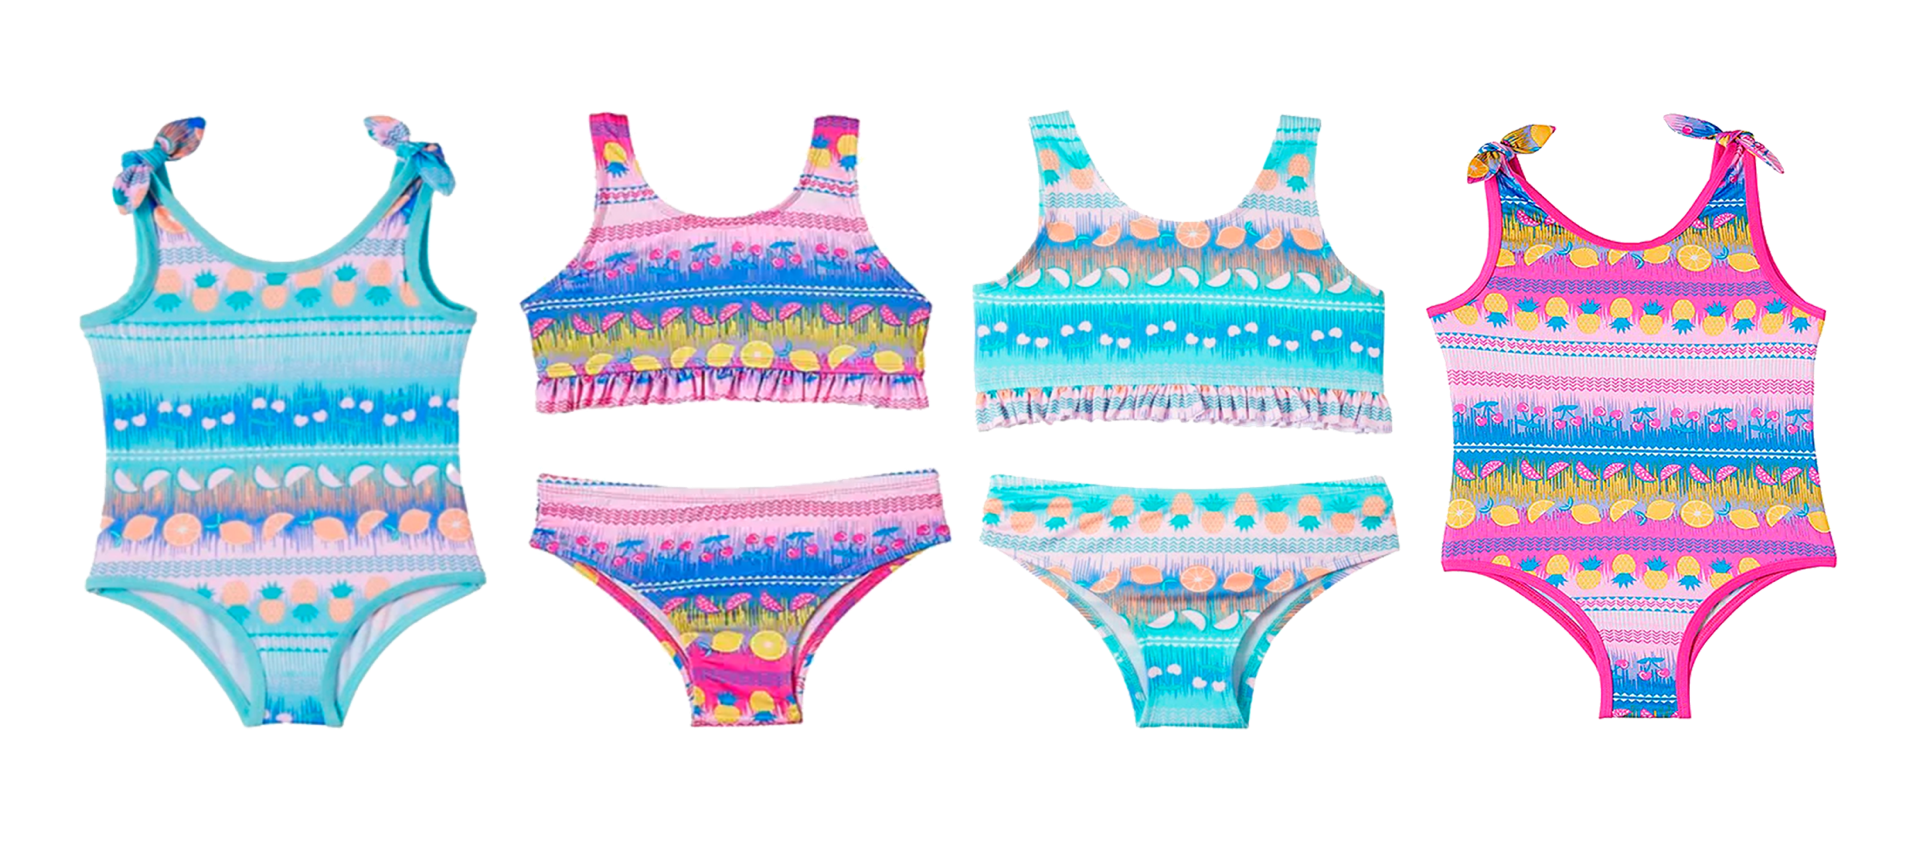 Infant Girl's Two Tone One-Piece & Two-Piece Swimsuits  - Tropical Fruit & Tribal Print - Sizes 12M-